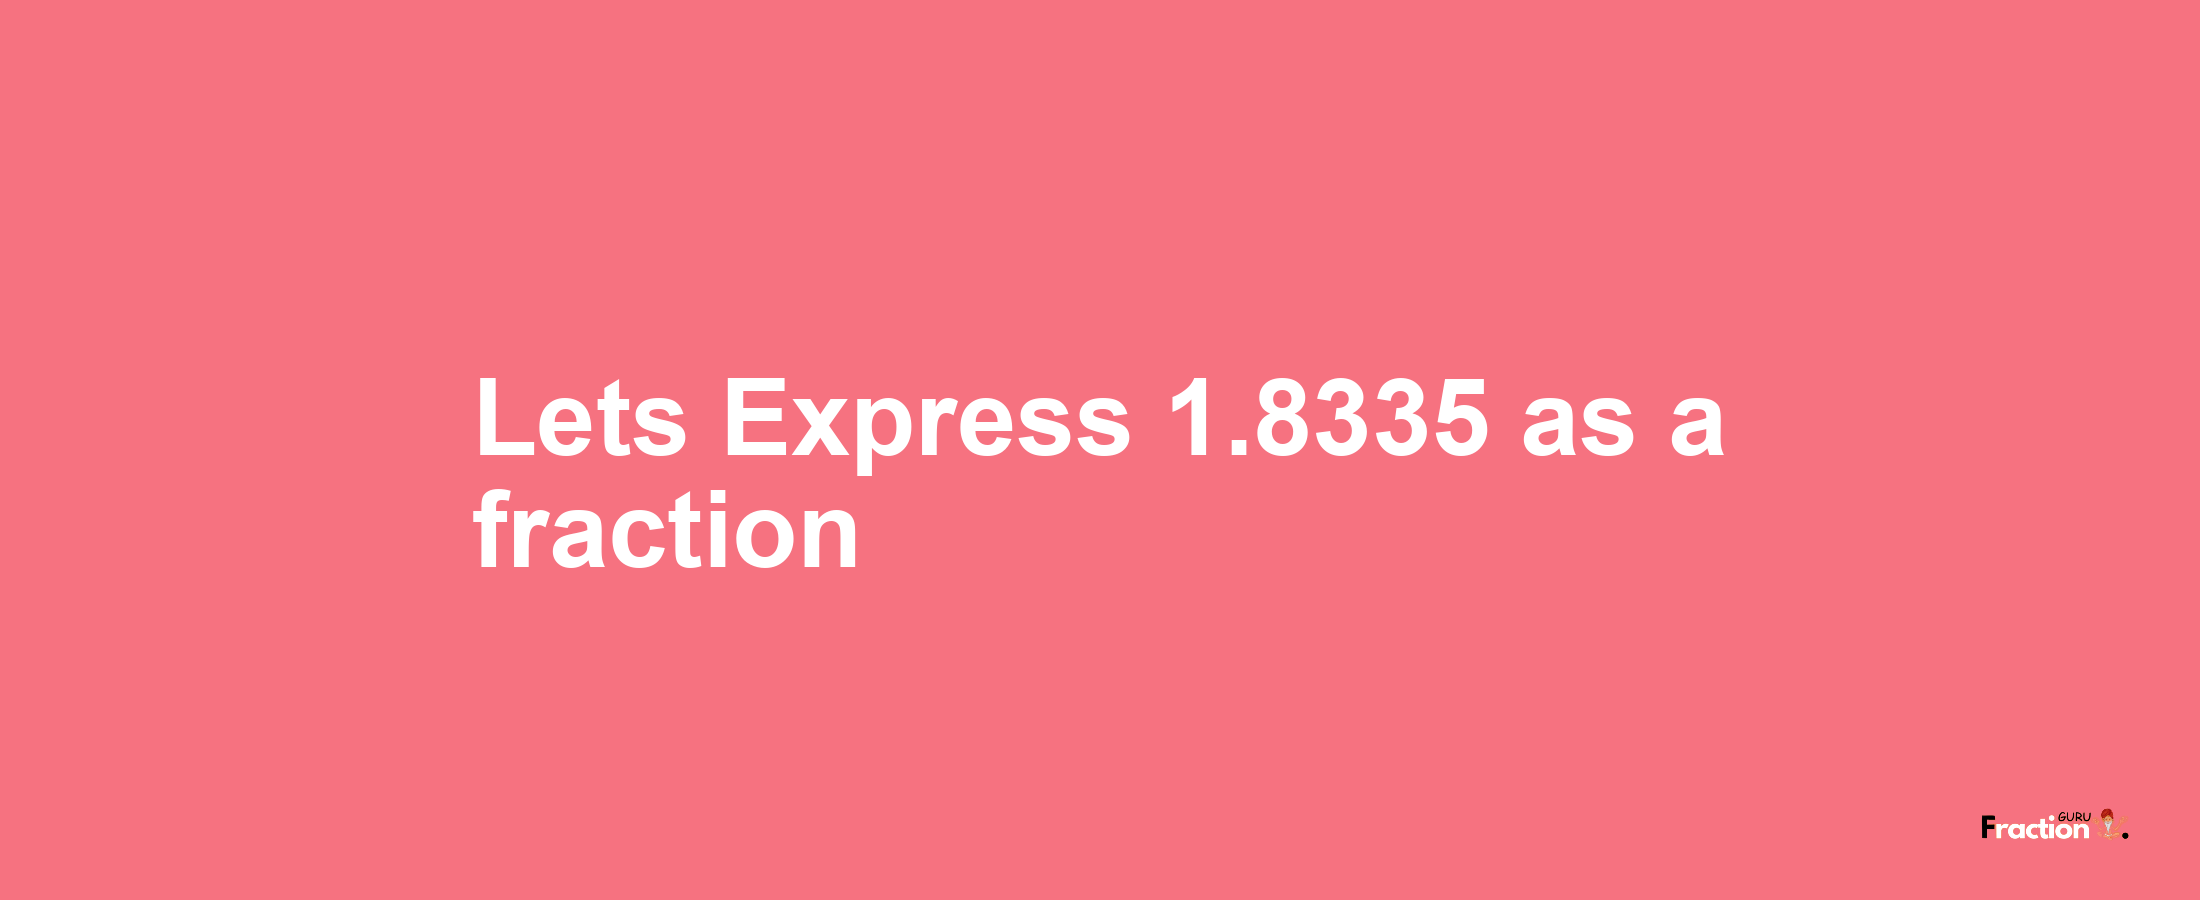 Lets Express 1.8335 as afraction